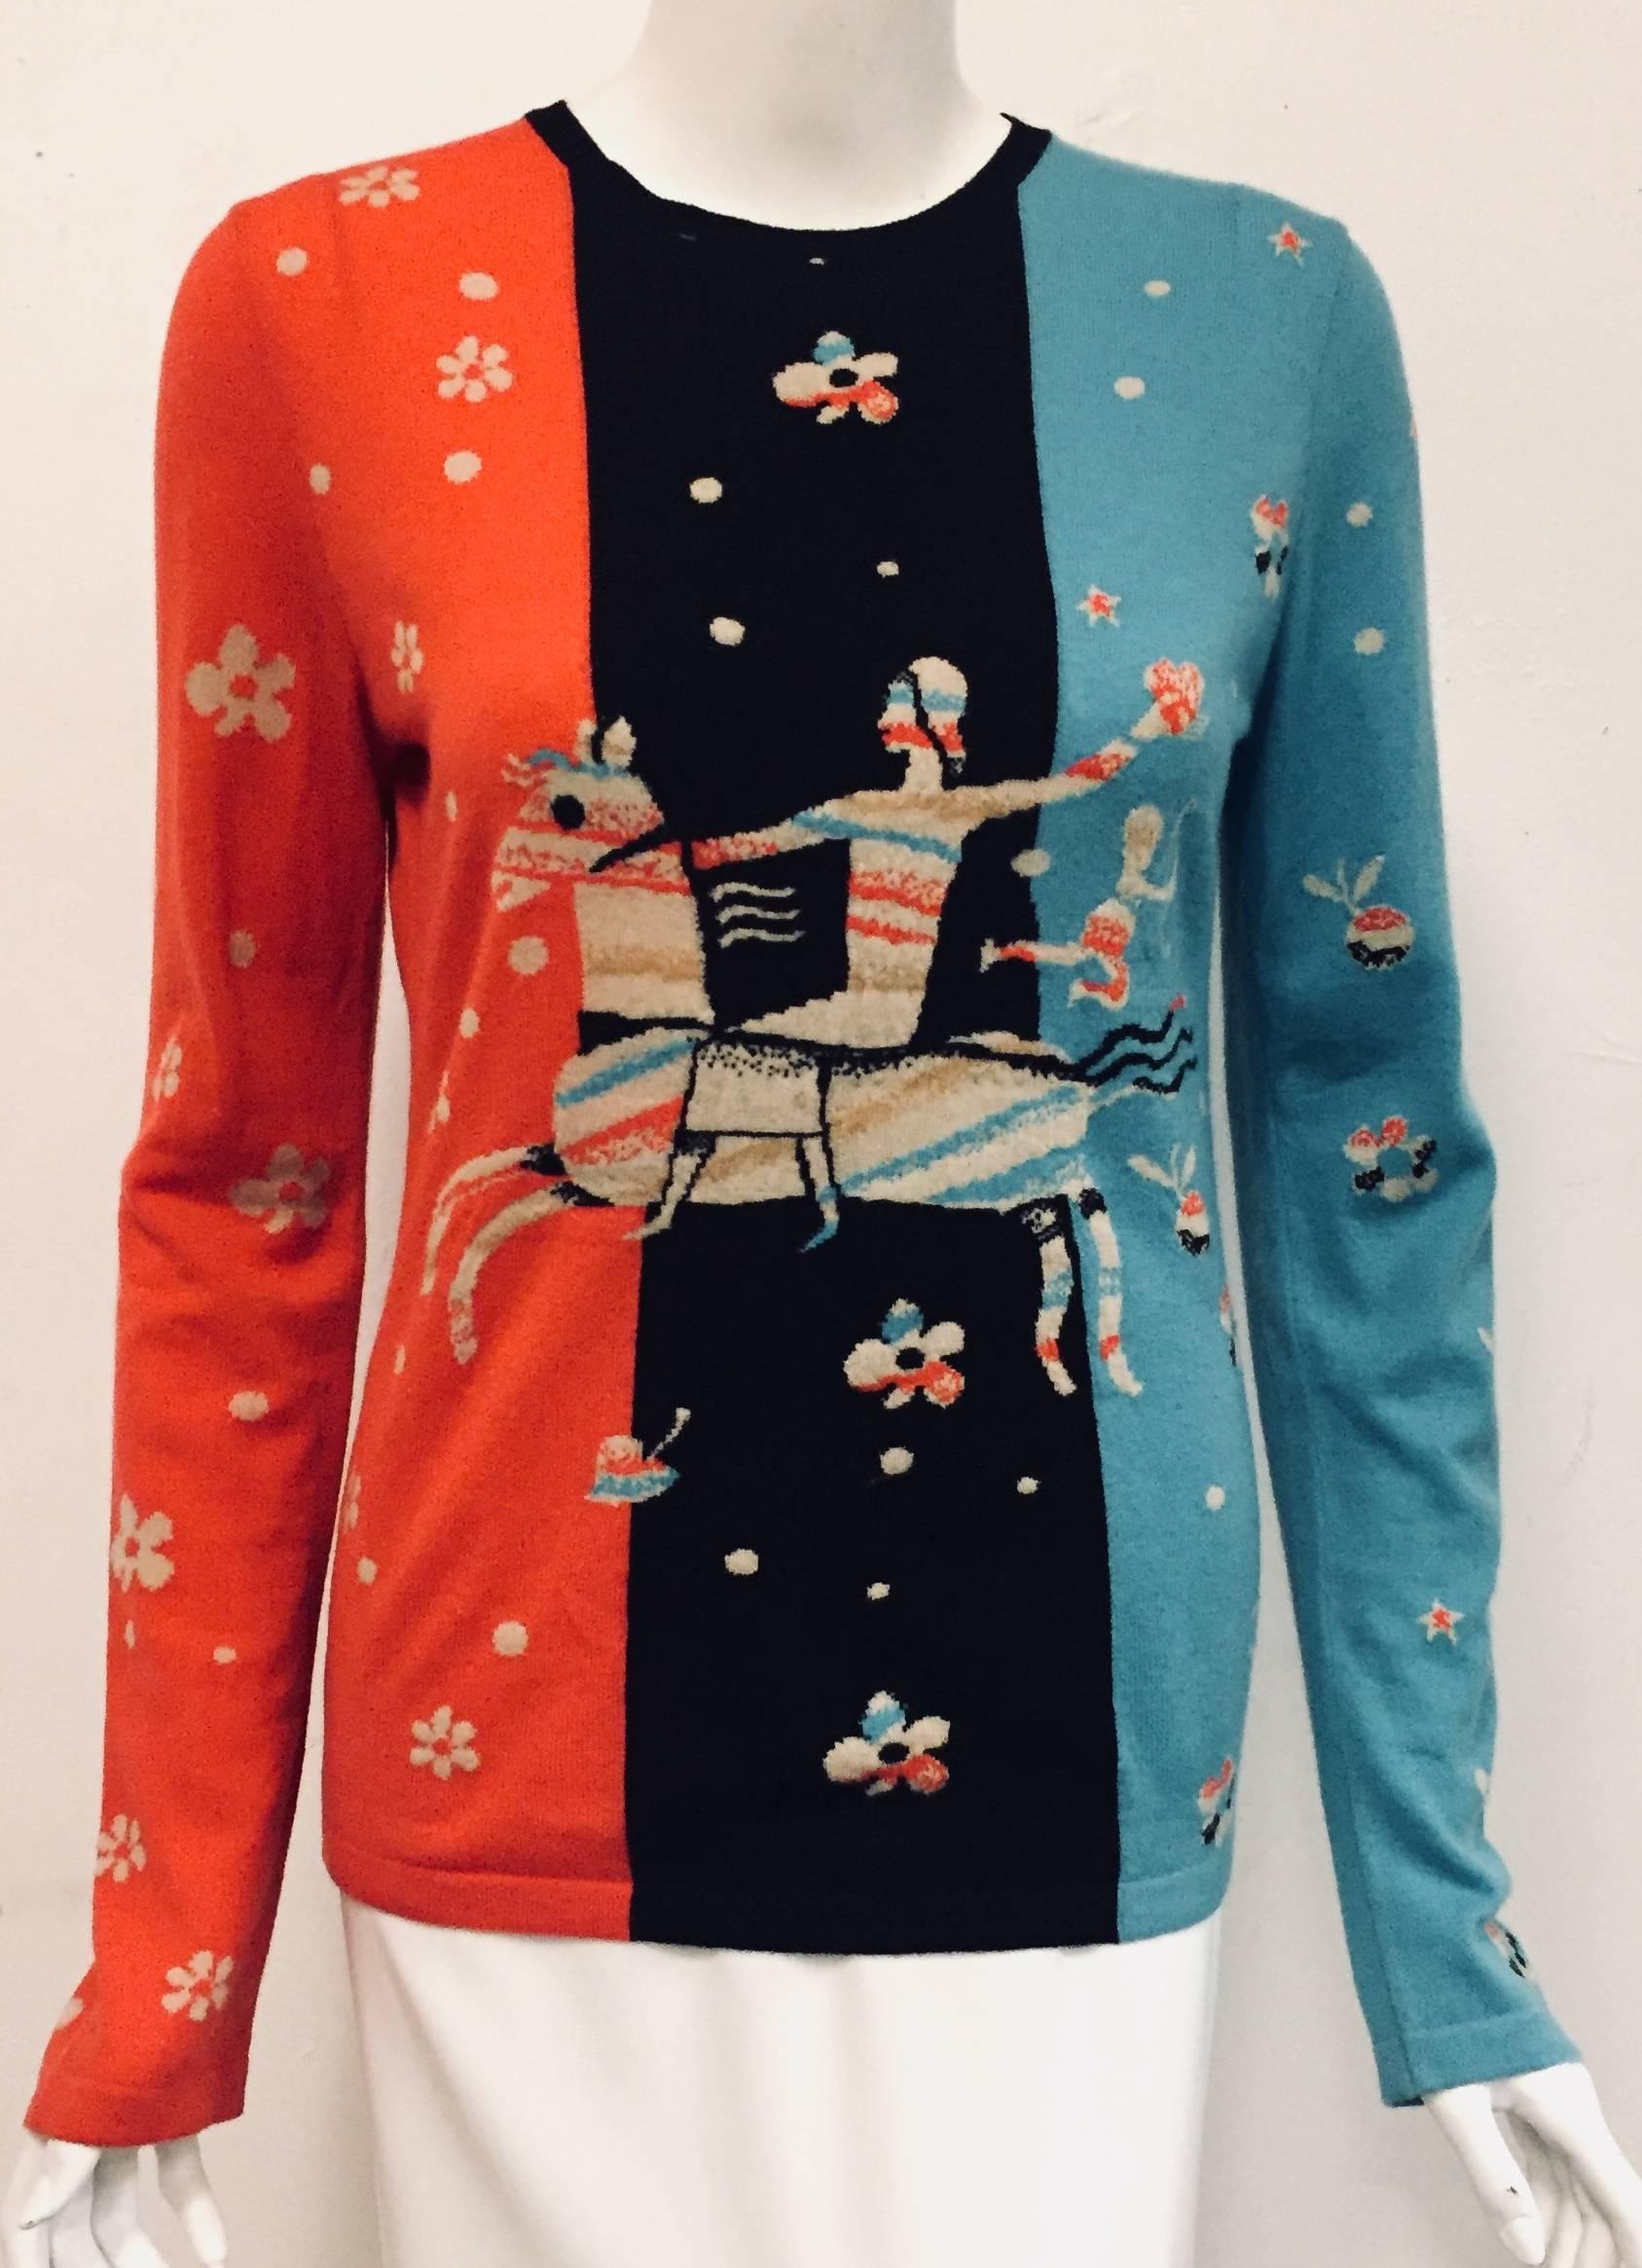 Chanel cashmere pullover sweater with whimsical print of man on a horse and Cupid with his arrow?  It's Chanel being playful!  This round collar sweater with black knit trim and long sleeves features one in red and the other in turquoise.  The front